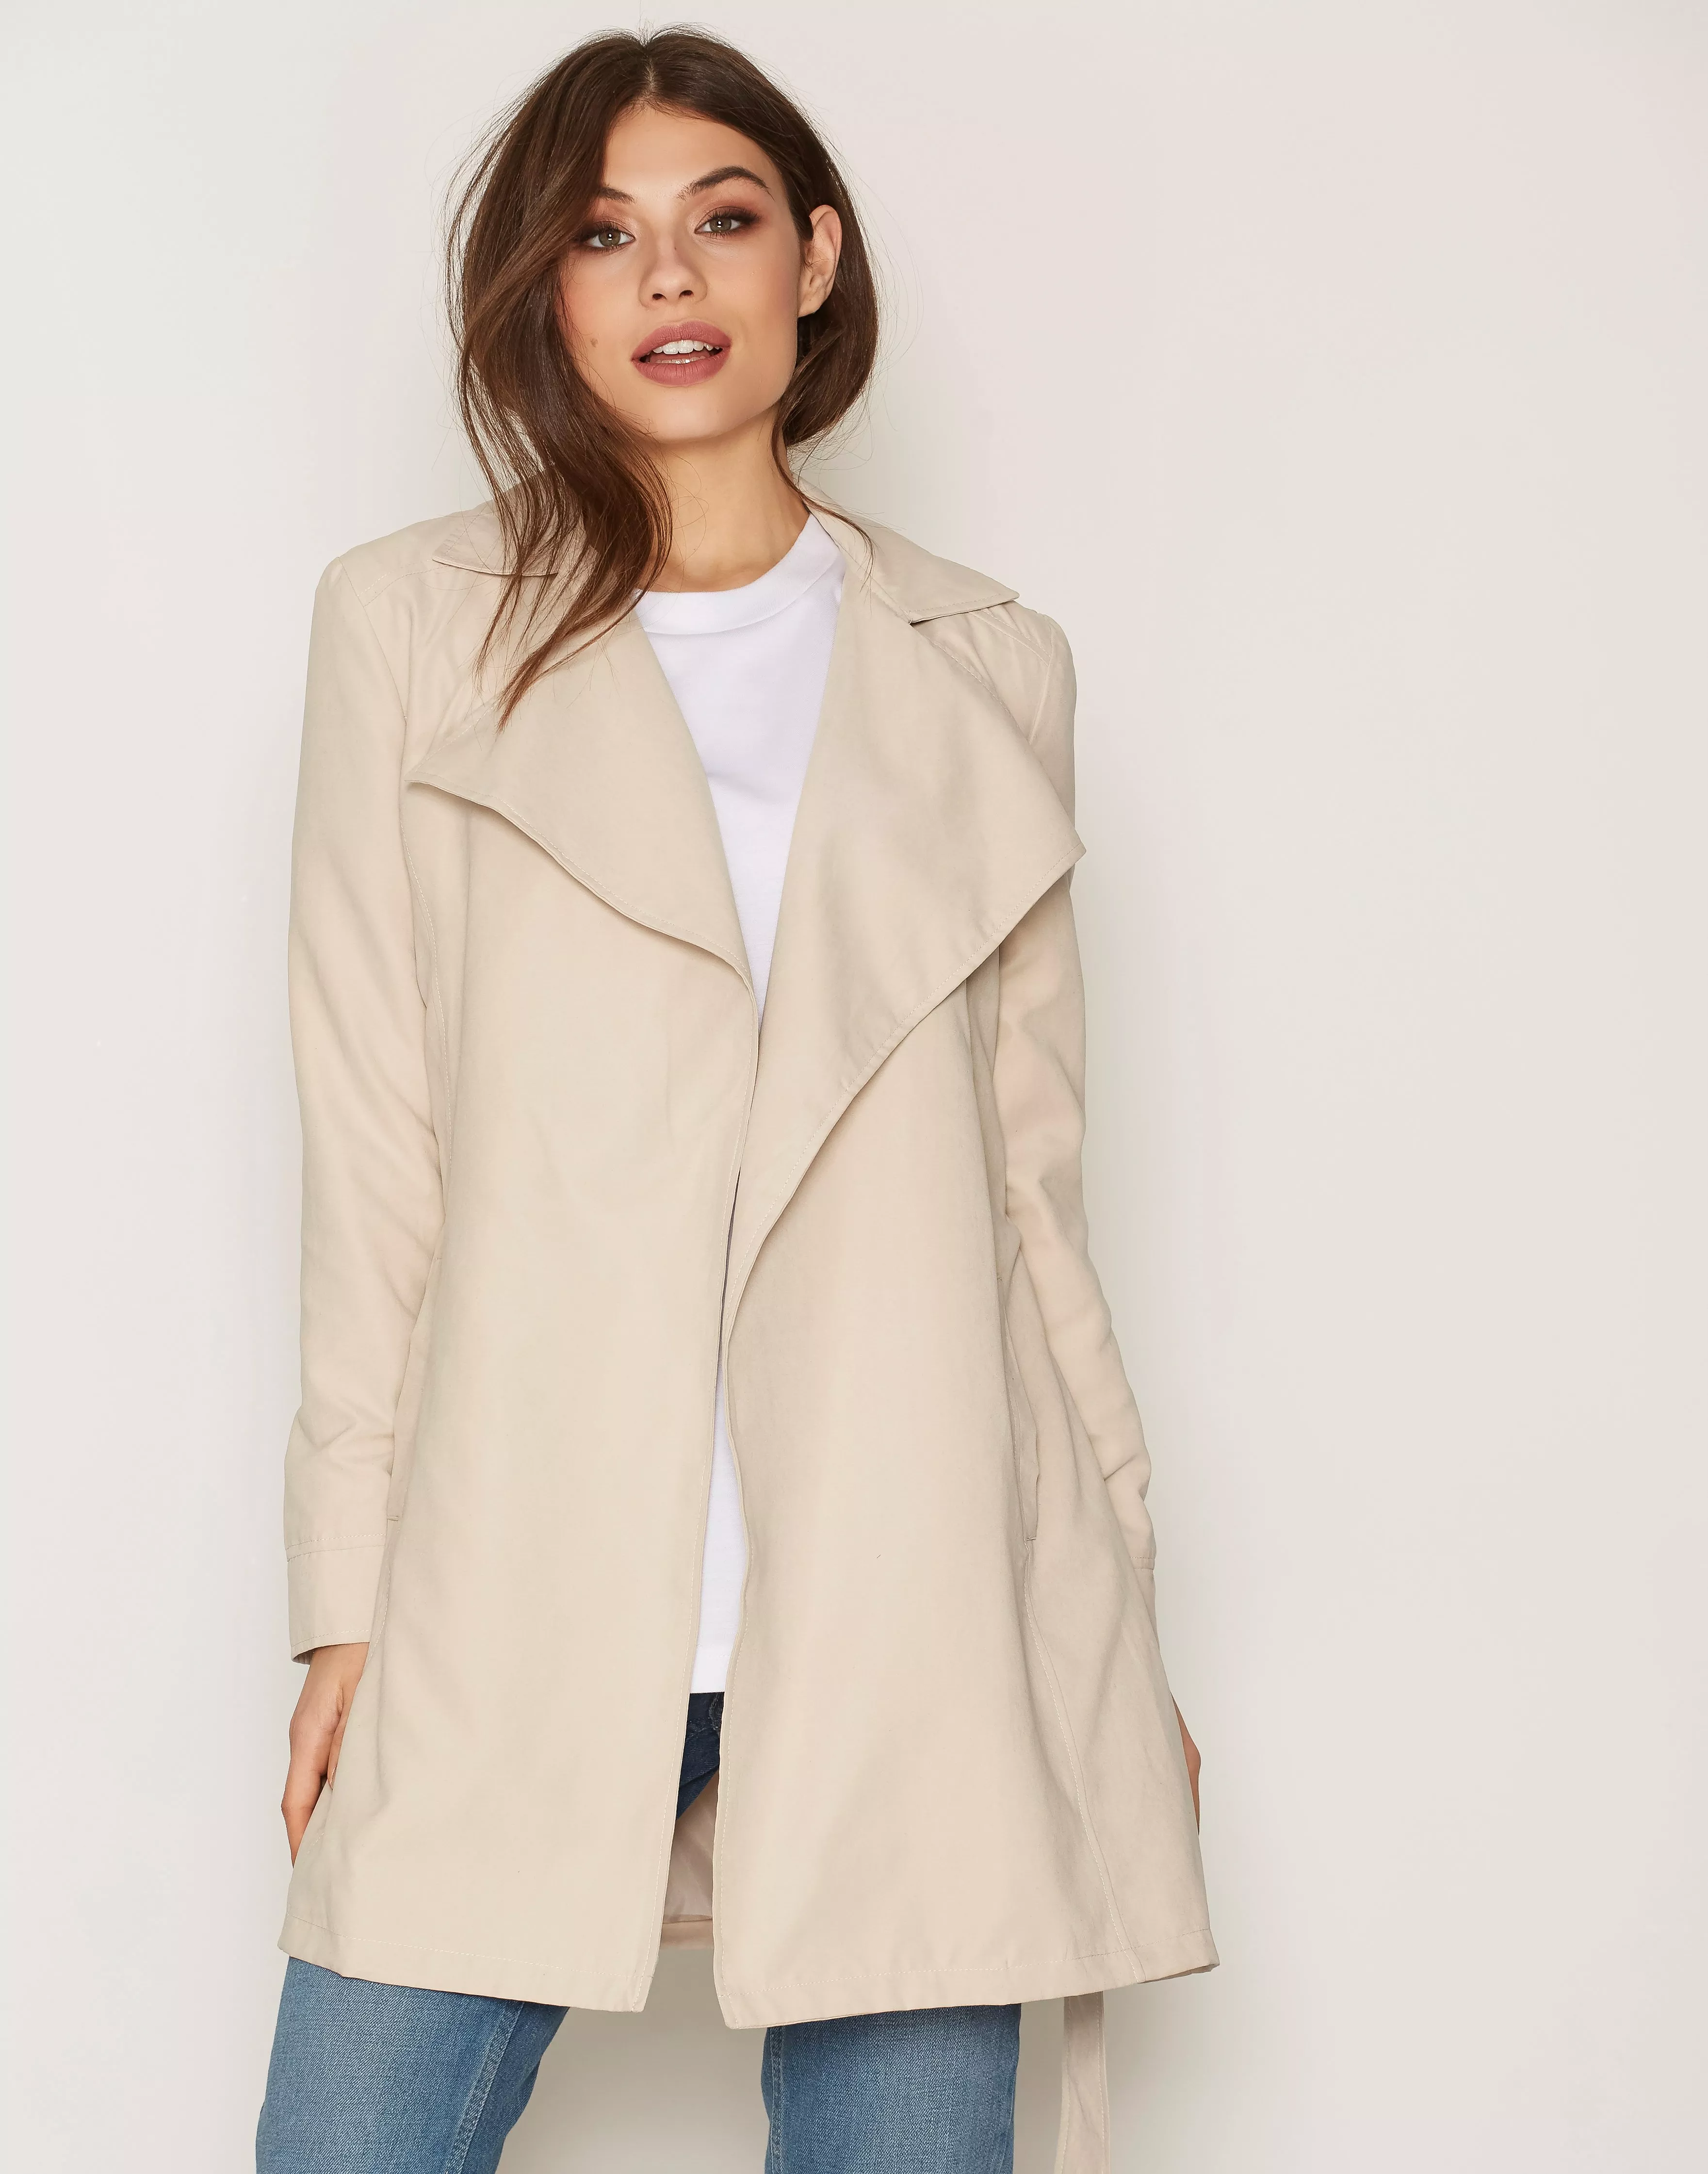 Coat Beige - Spring Nelly Buy Trench Soft